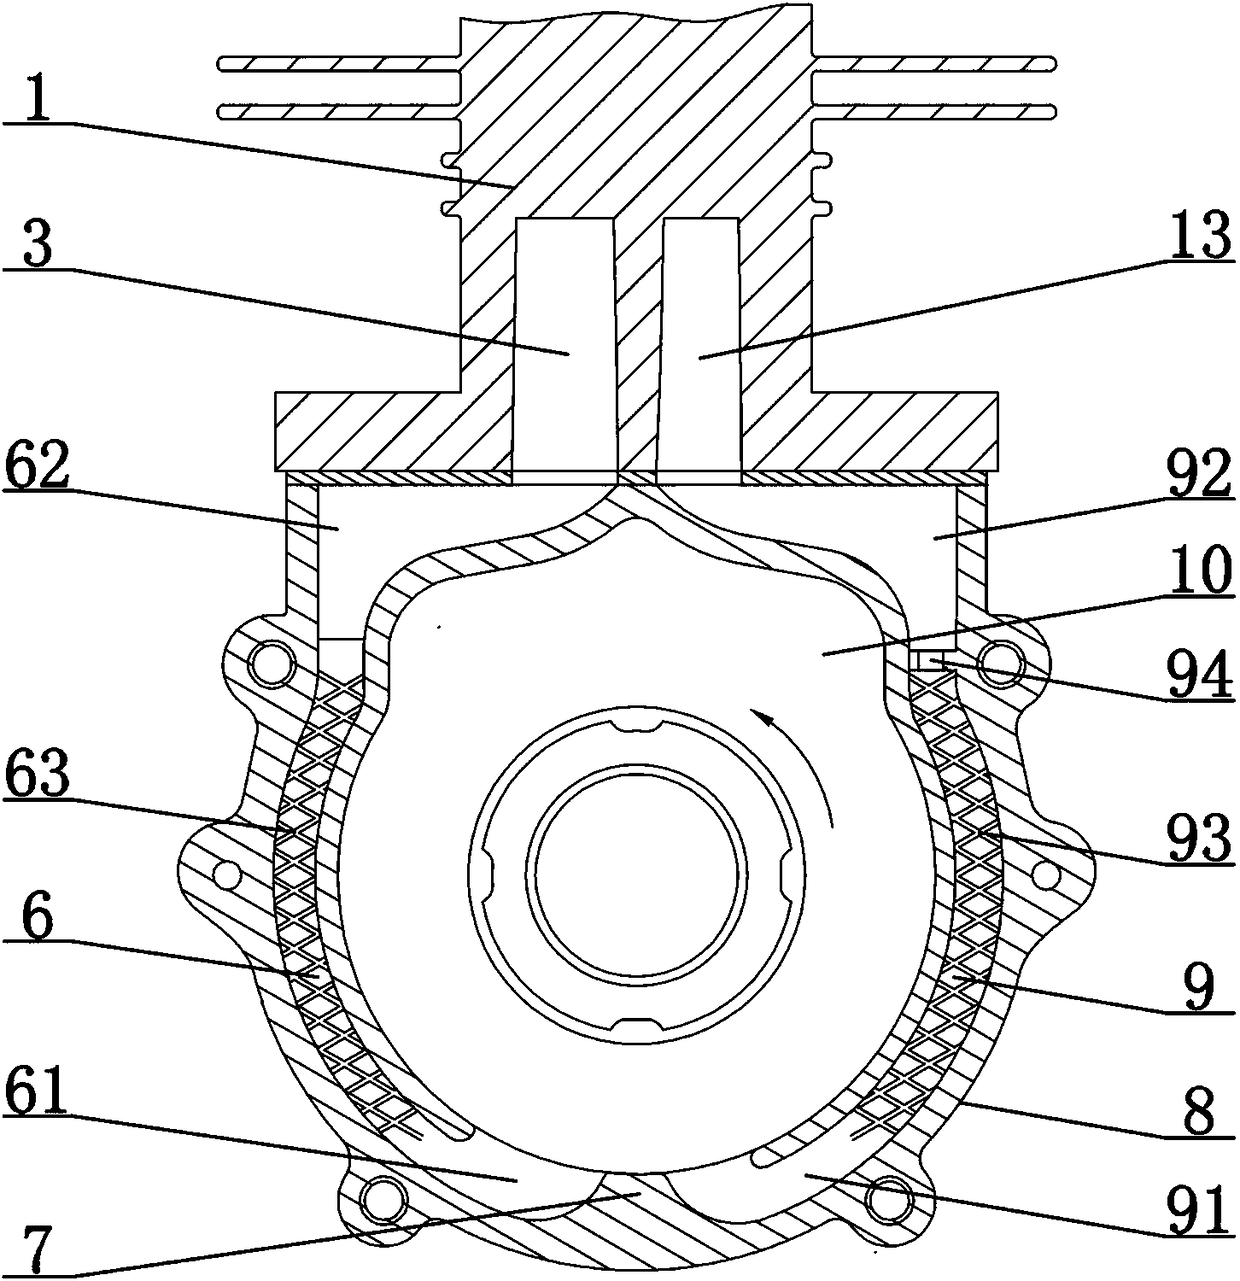 A scavenging system for a two-stroke engine